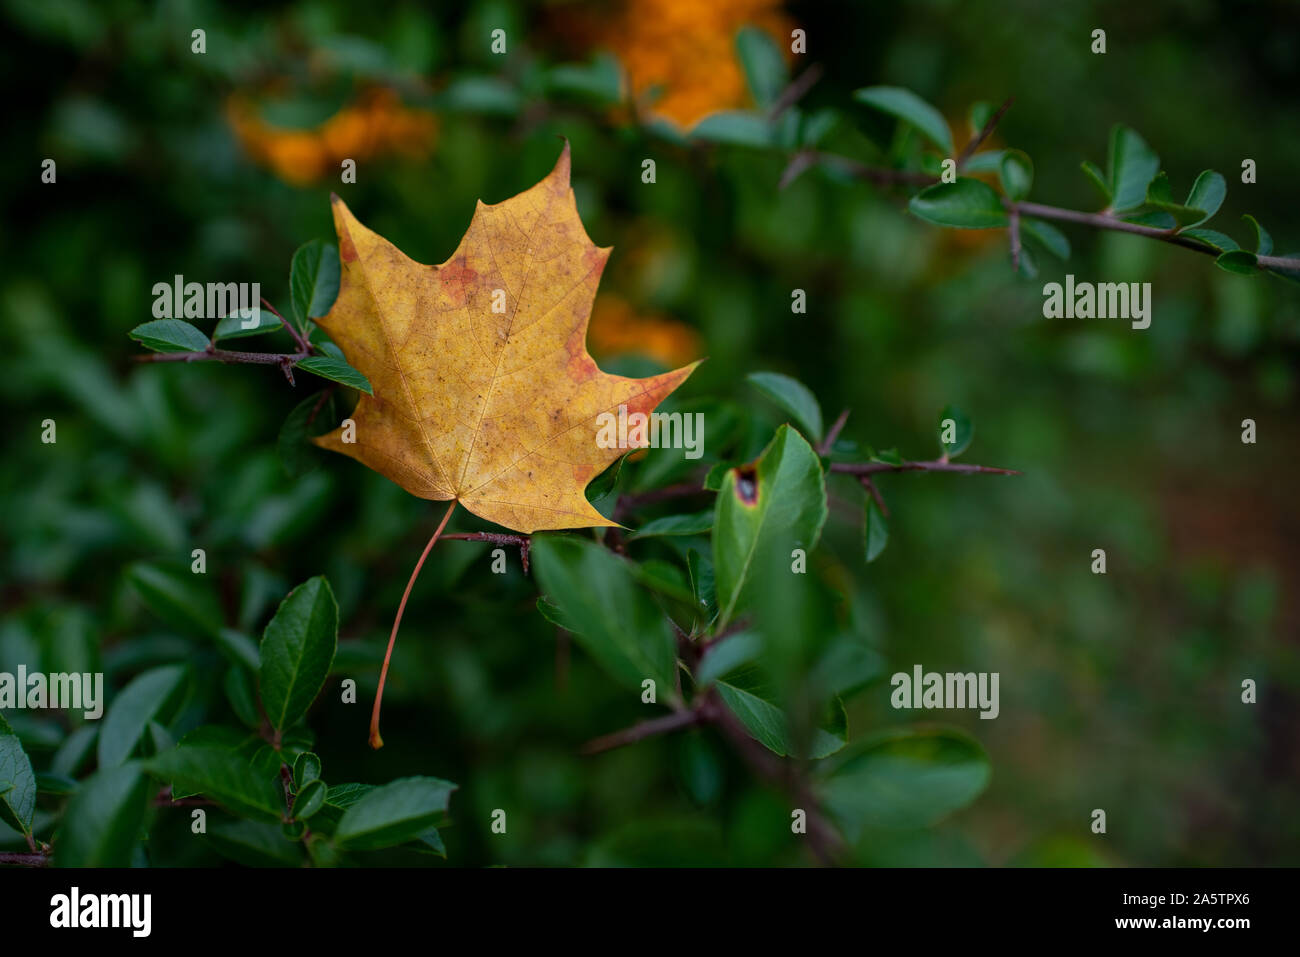 Dying orange leaf on green hedge in autumn. Stock Photo